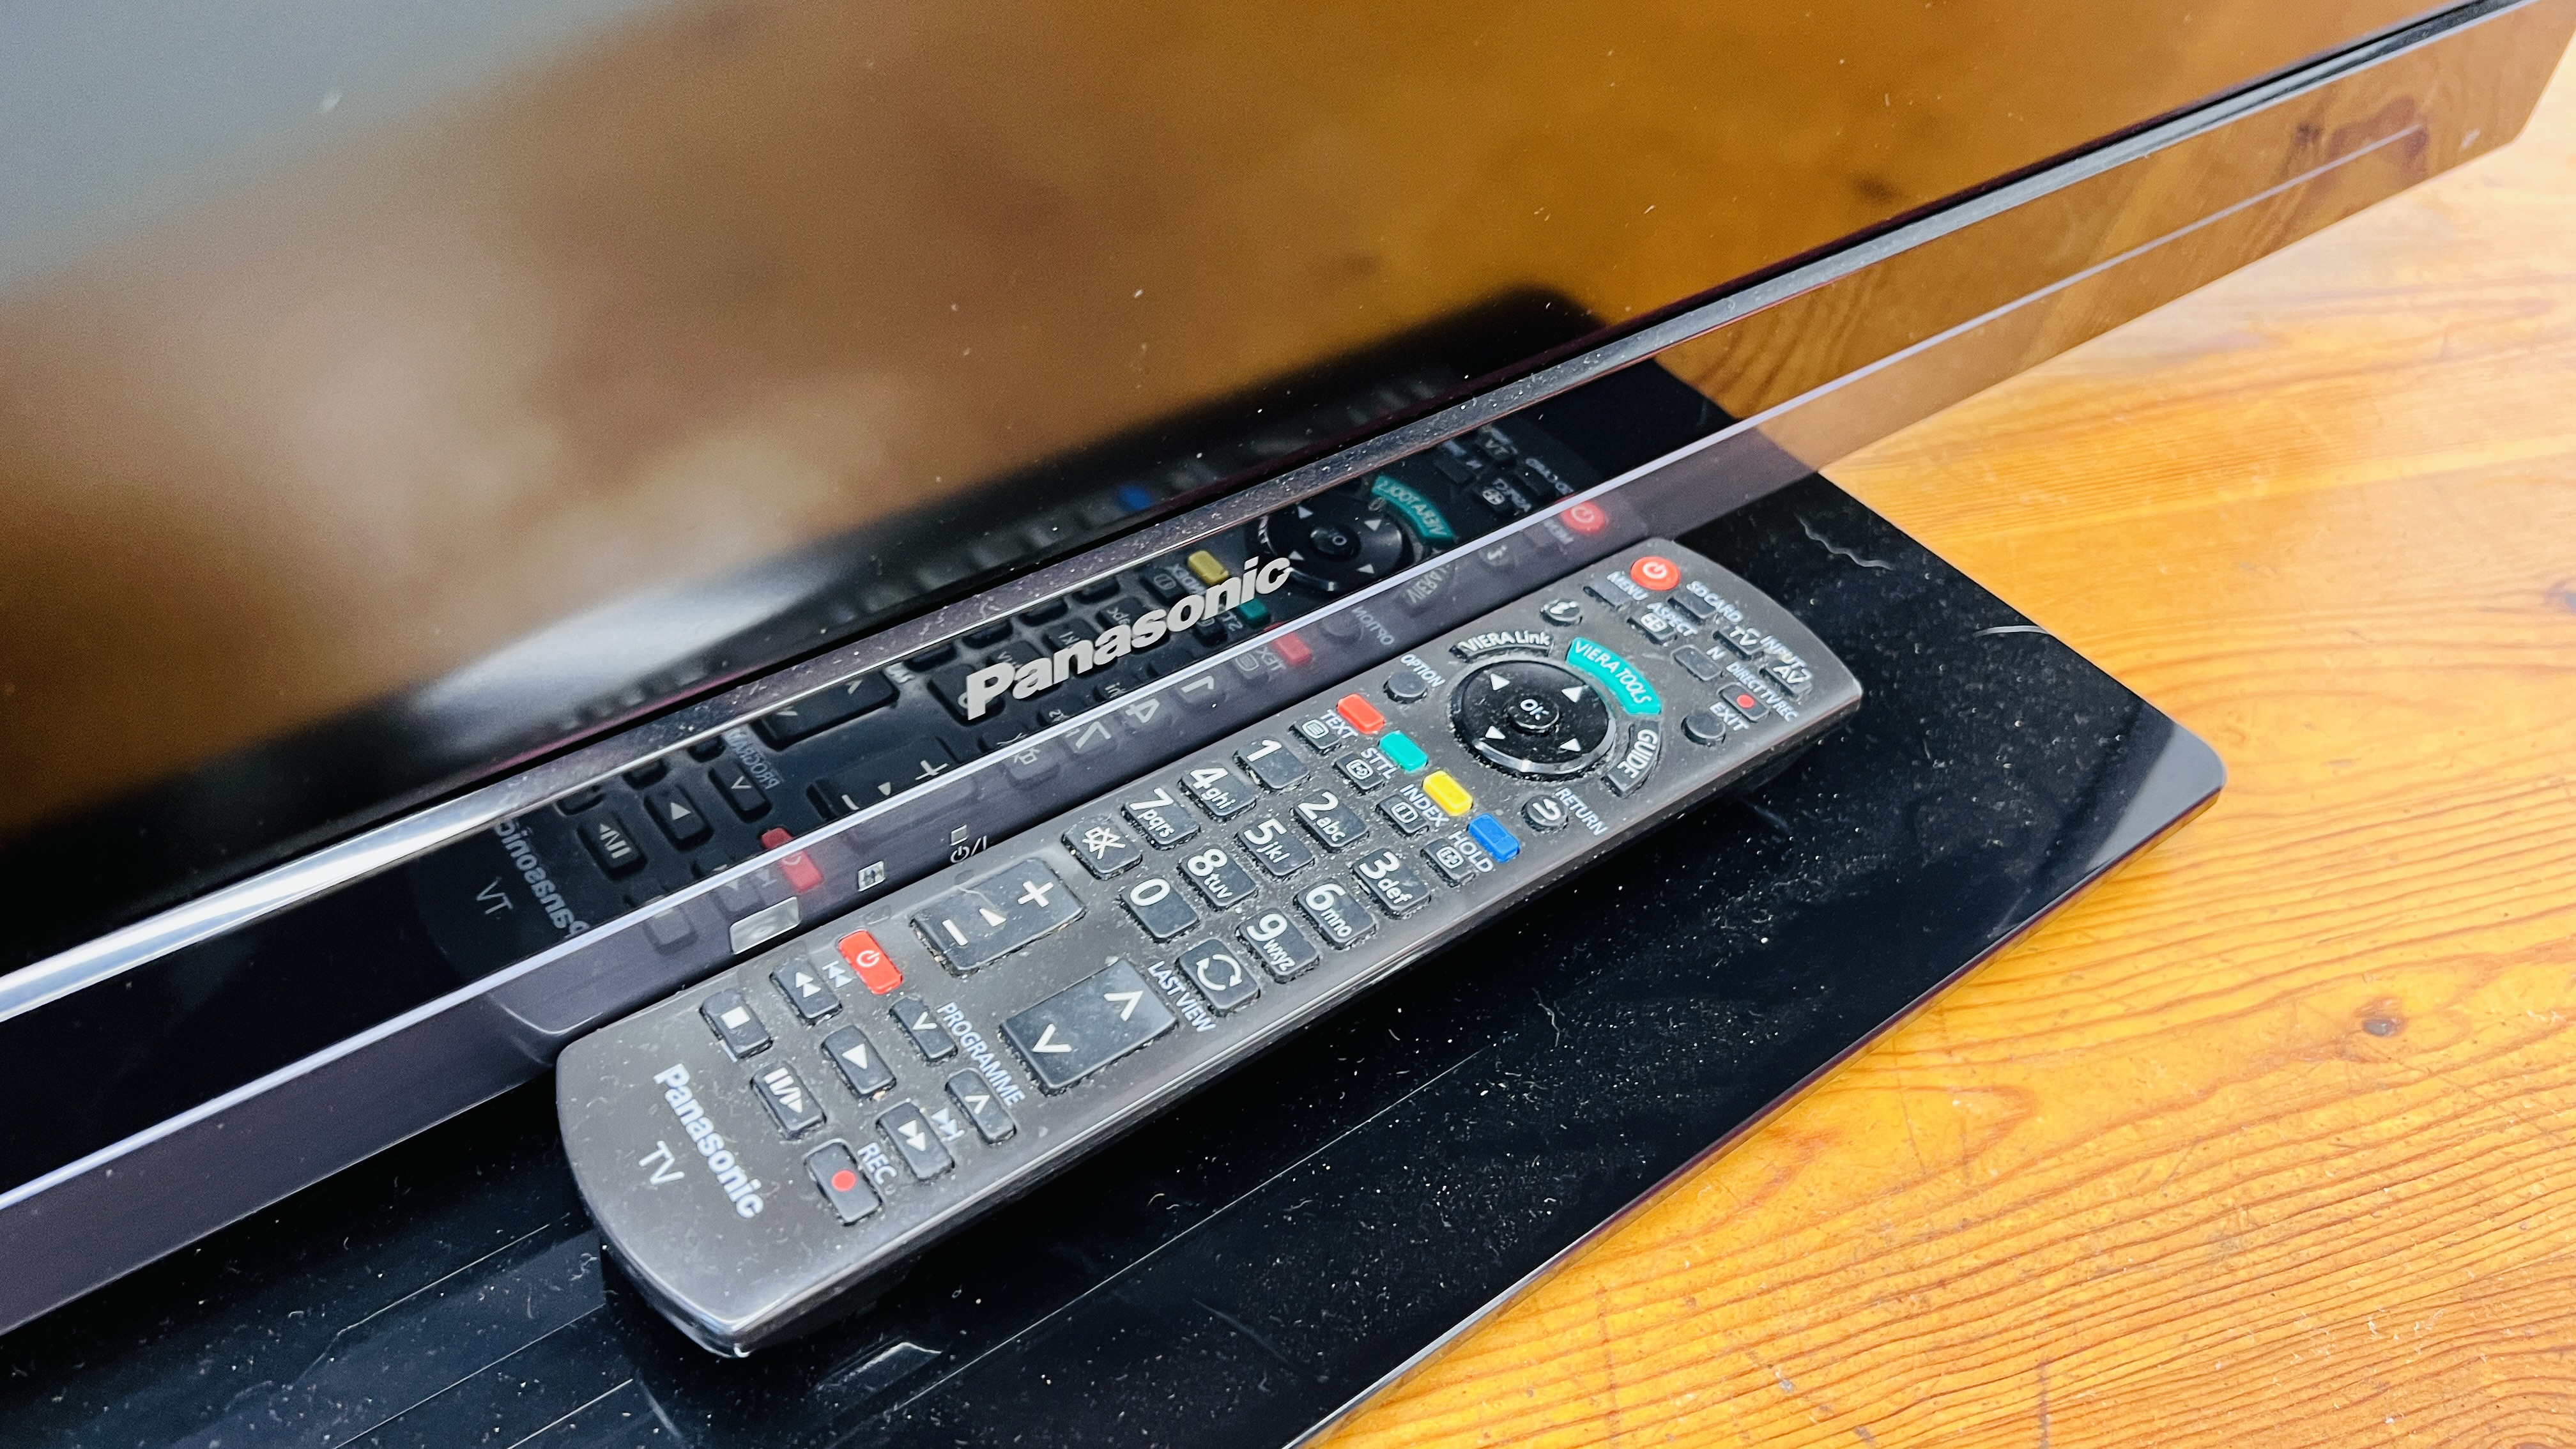 PANASONIC 37 INCH TELEVISION COMPLETE WITH REMOTE CONTROL - SOLD AS SEEN. - Image 3 of 5